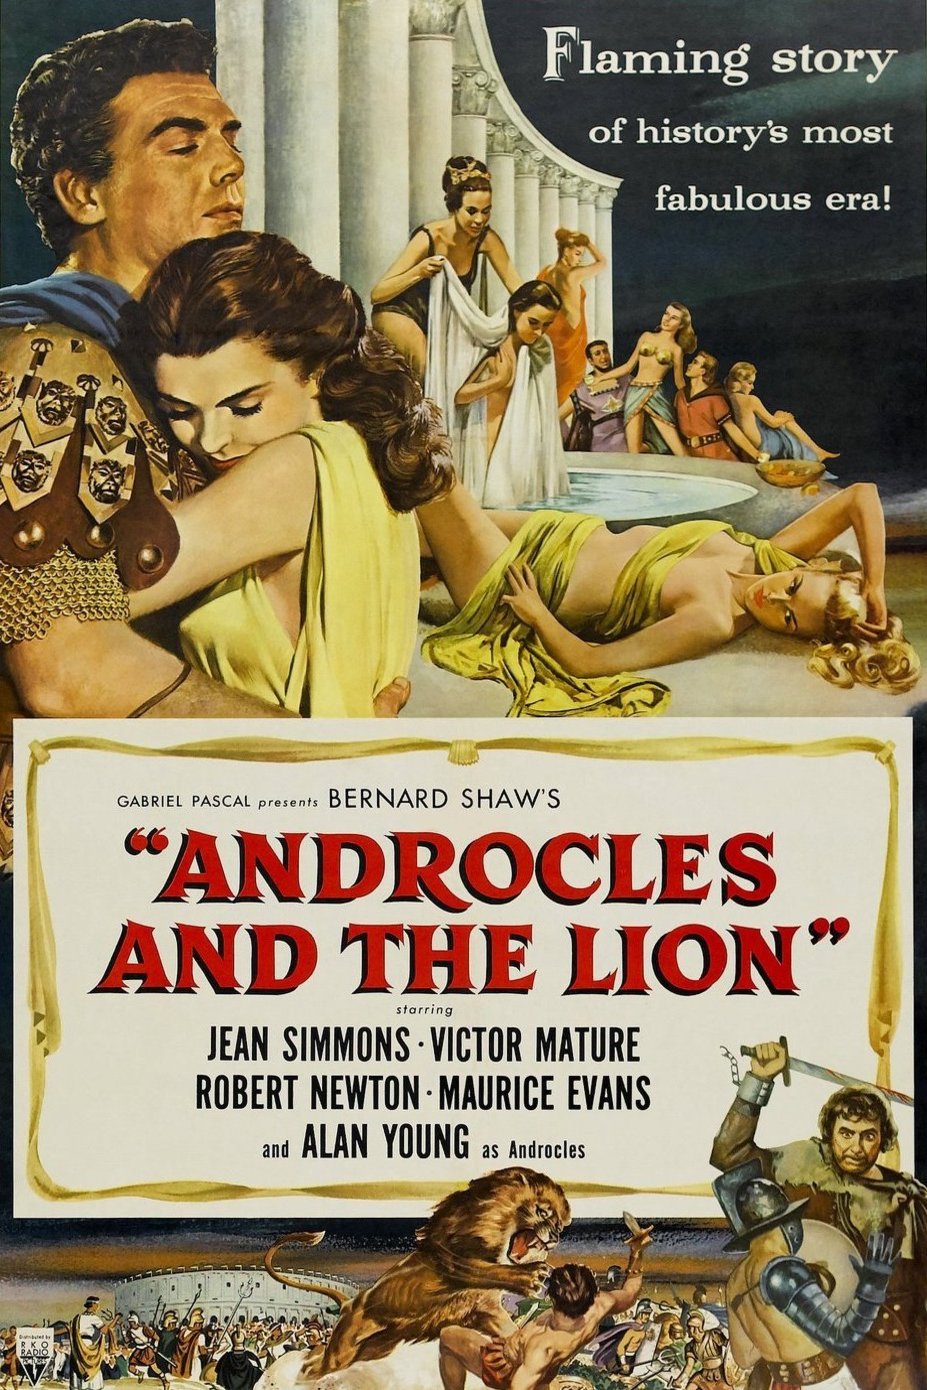 Poster of the movie Androcles and the Lion